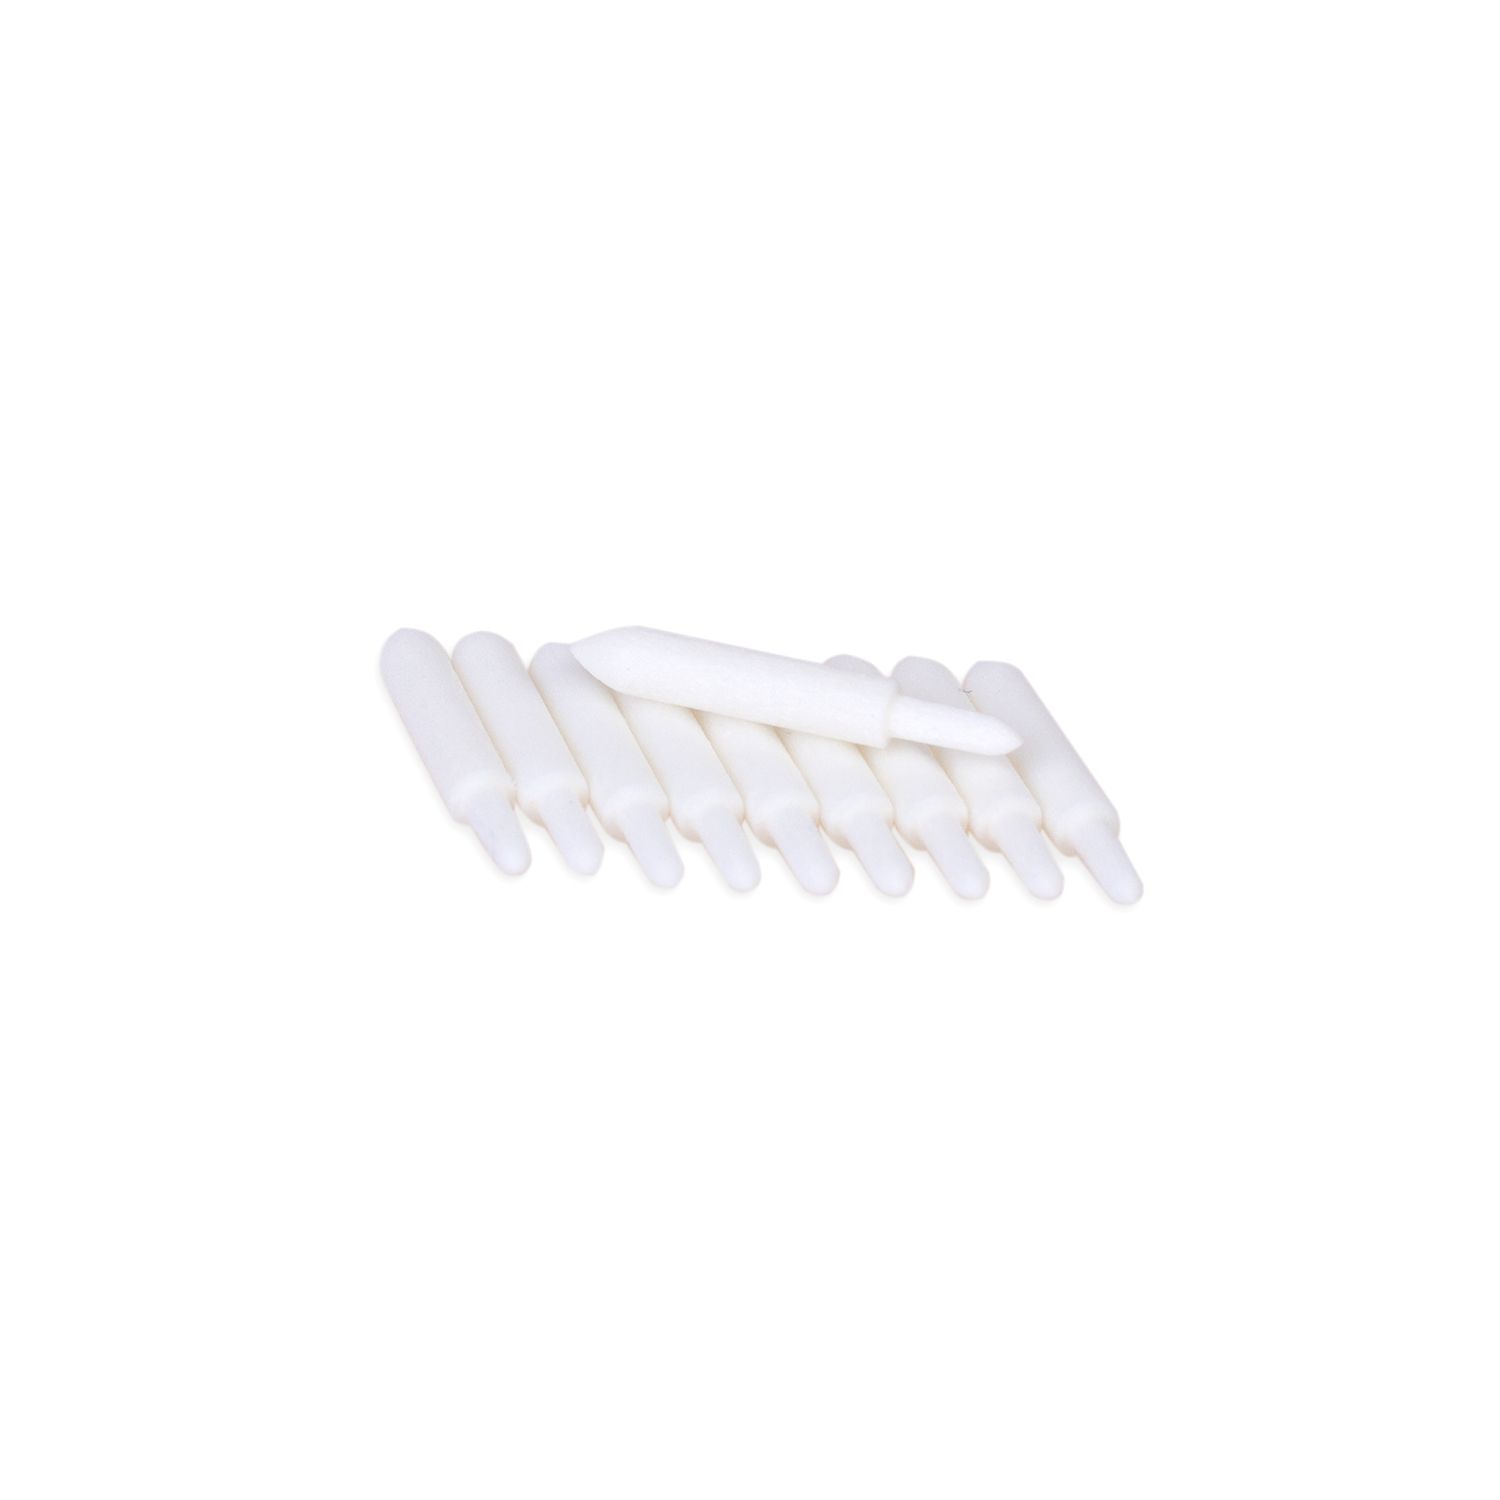 Felt tips for pen plating, thin, white (25 pieces)